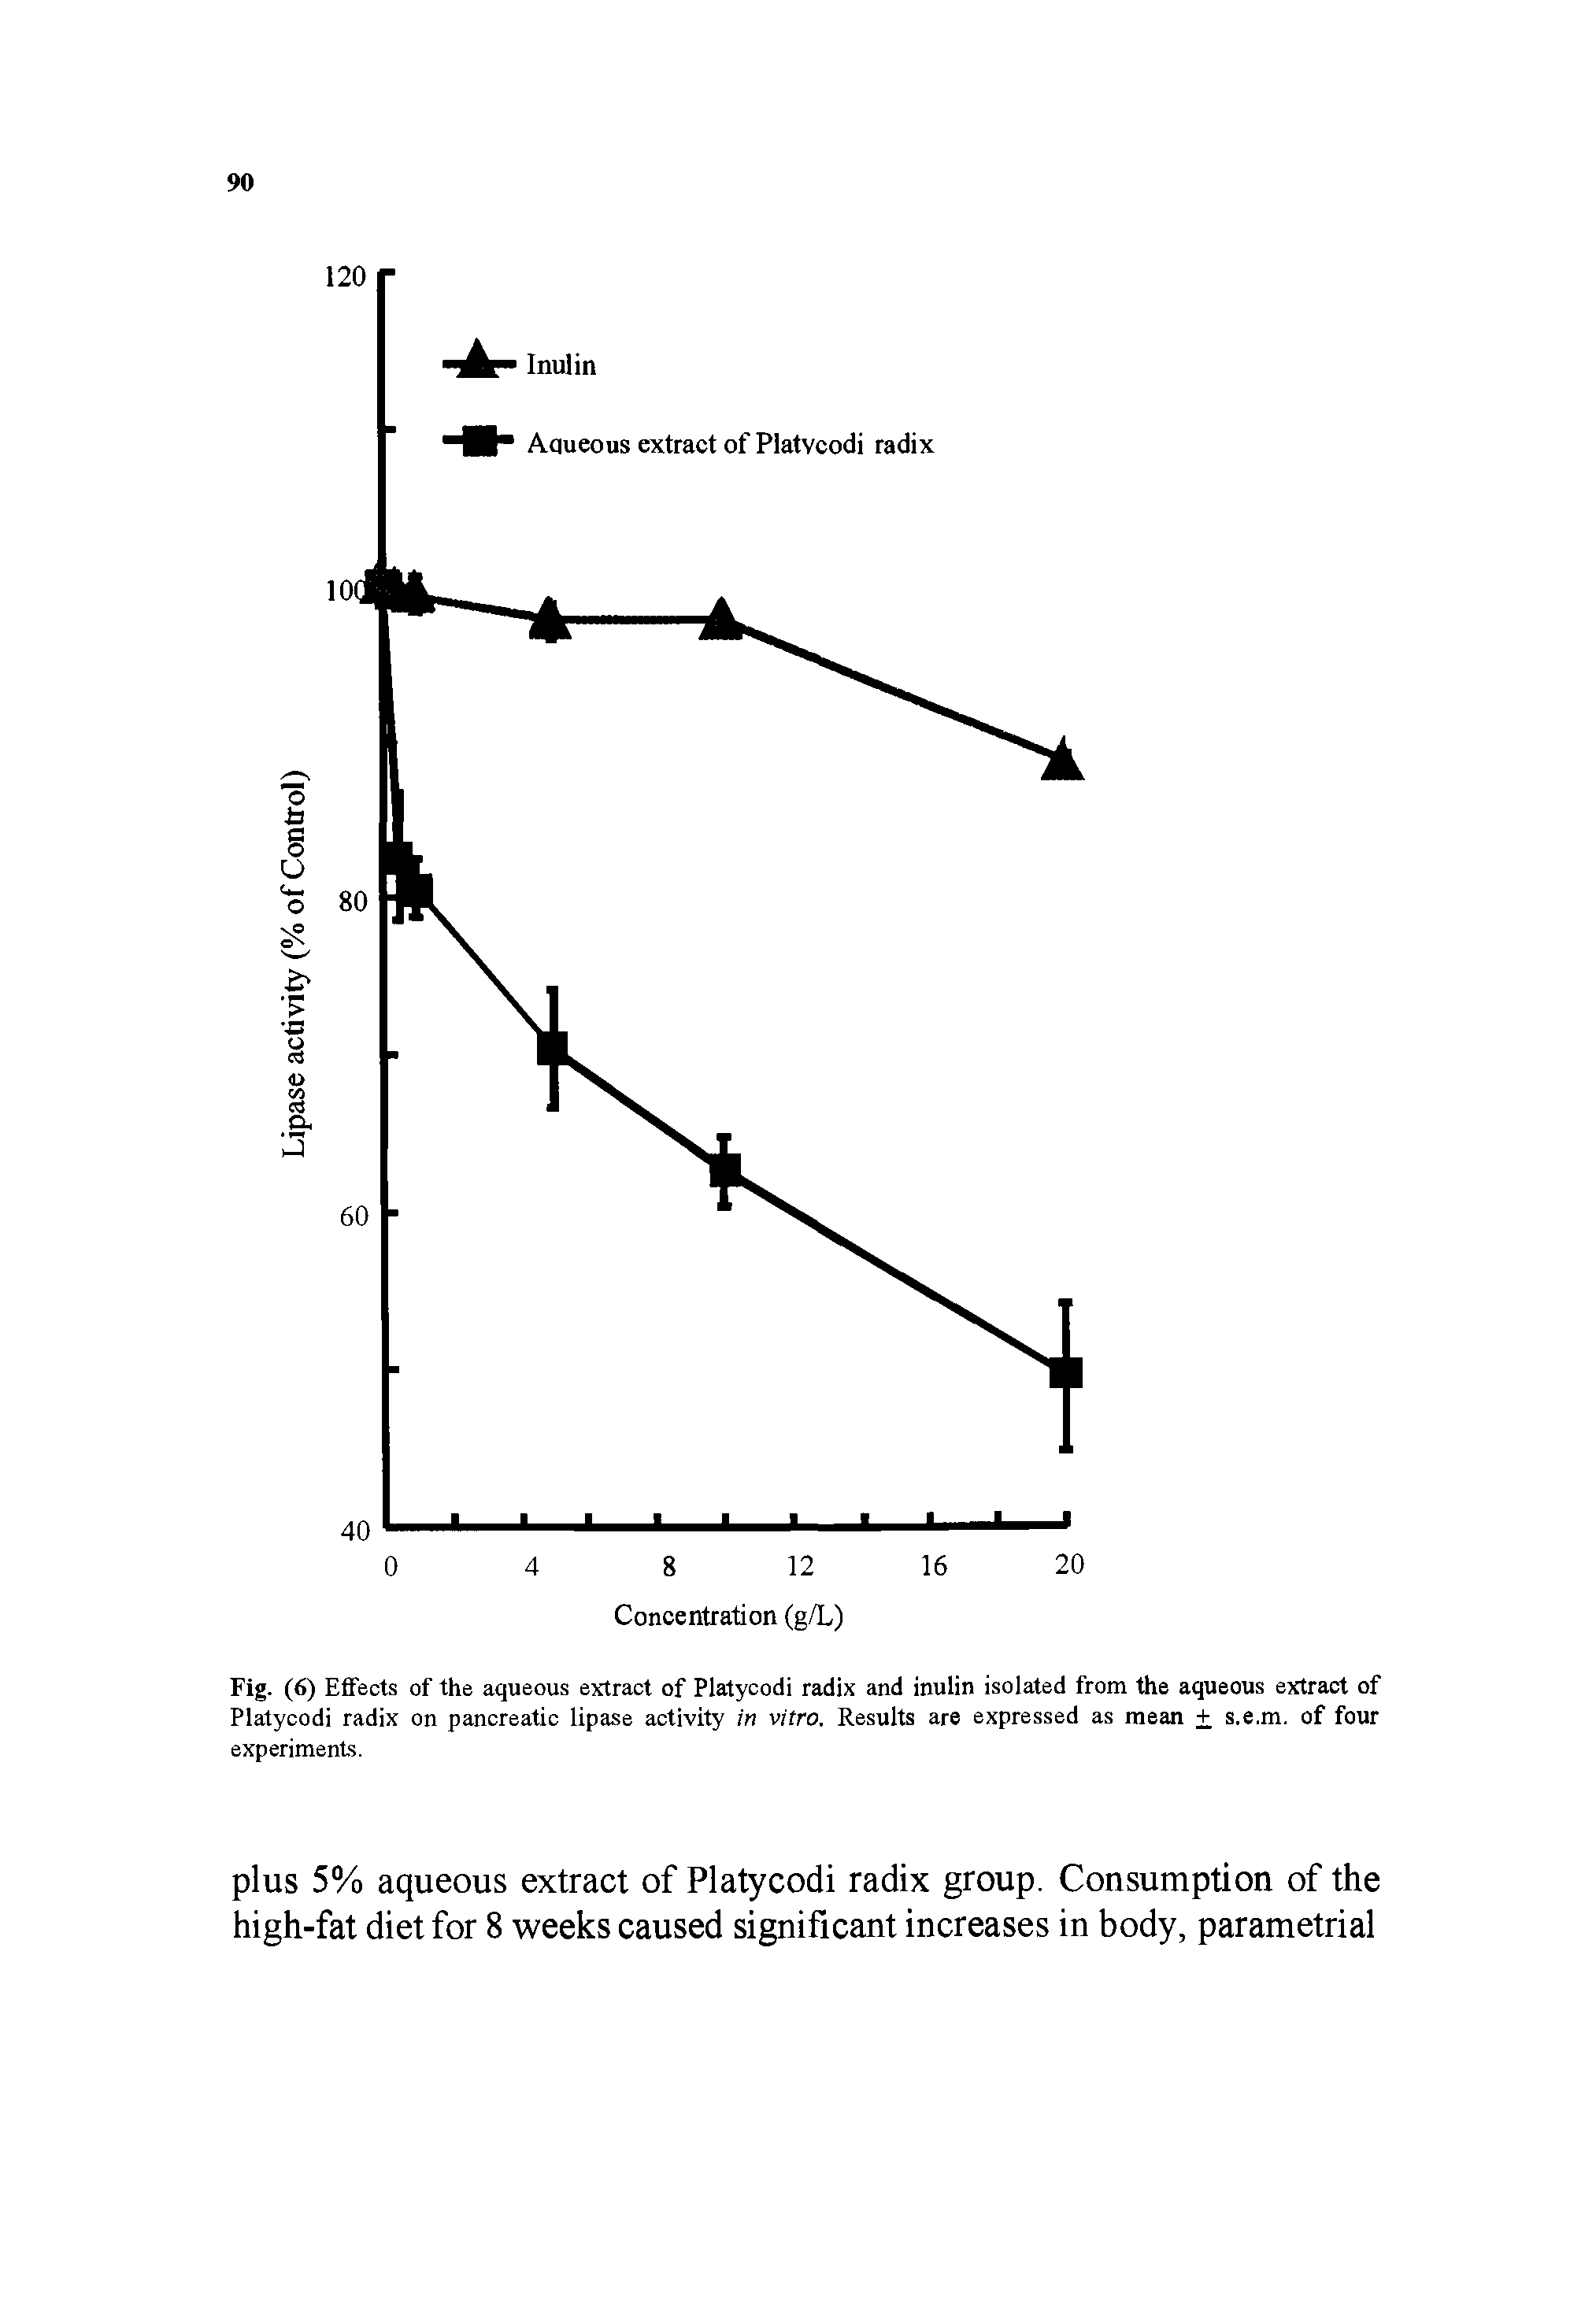 Fig. (6) Effects of the aqueous extract of Platycodi radix and inulin isolated from the aqueous extract of Platycodi radix on pancreatic lipase activity in vitro. Results are expressed as mean + s.e.m. of four experiments.